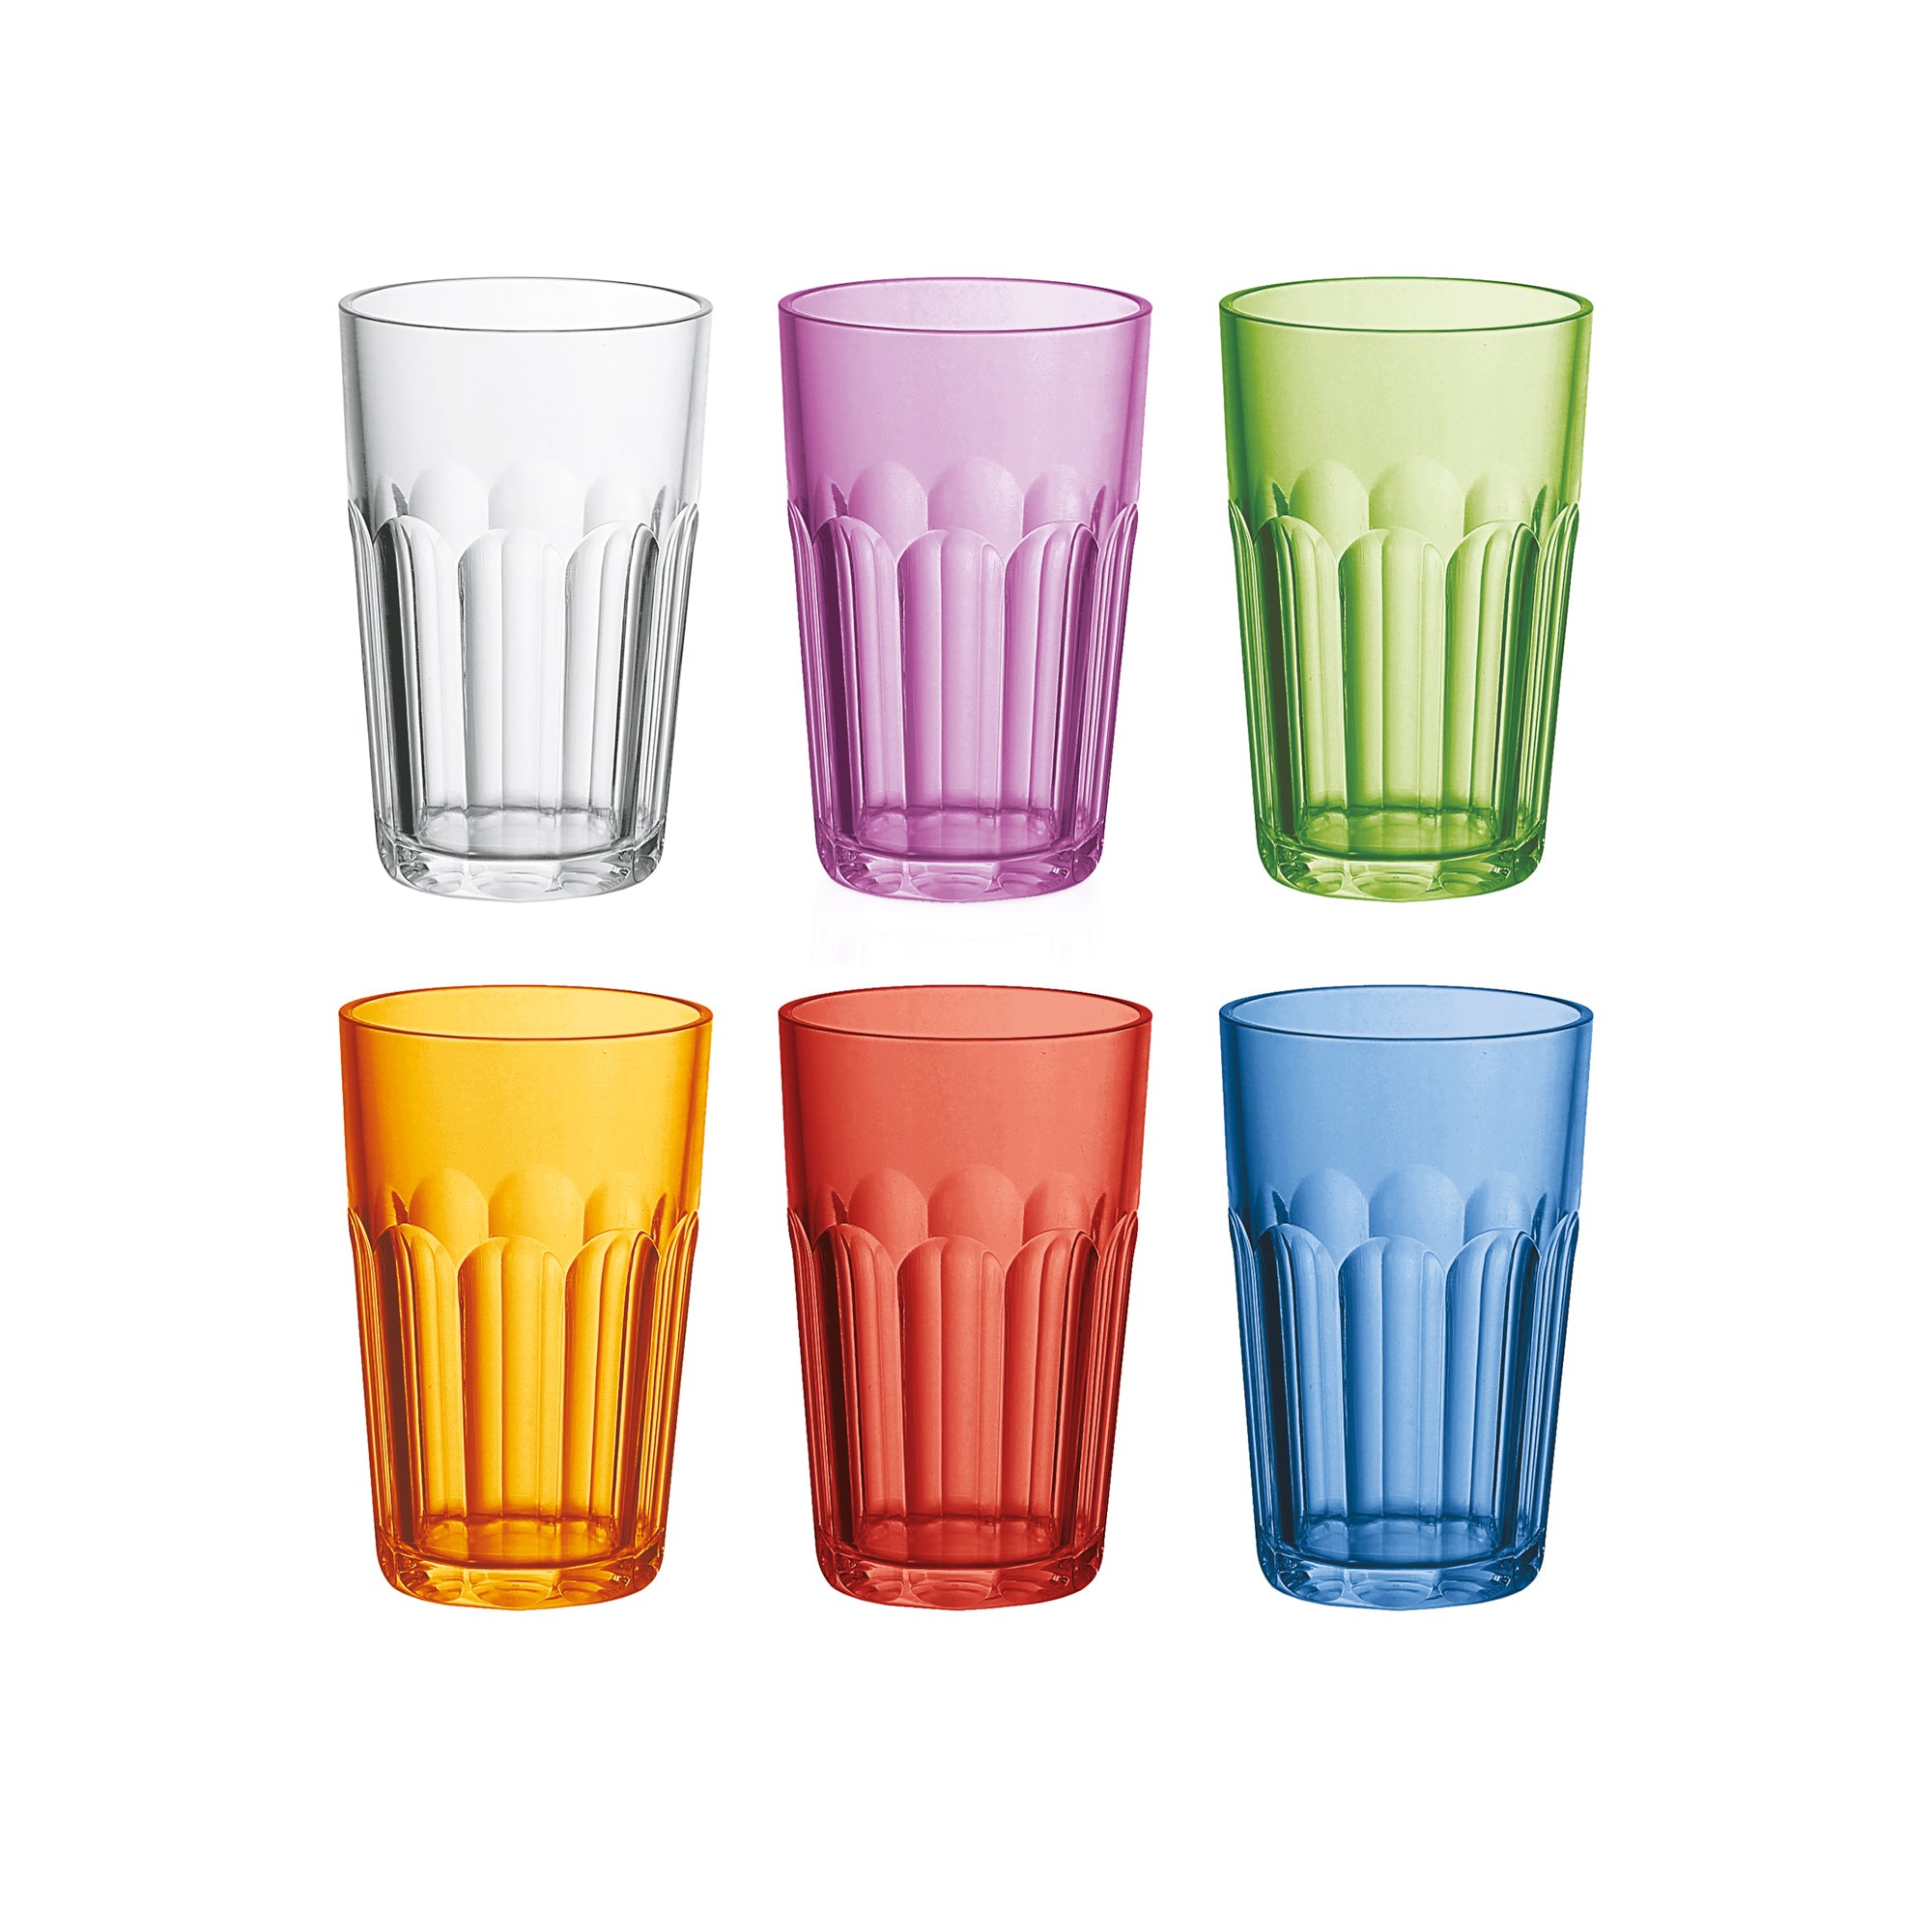 SET OF 6 TALL TUMBLERS "HAPPY HOUR"